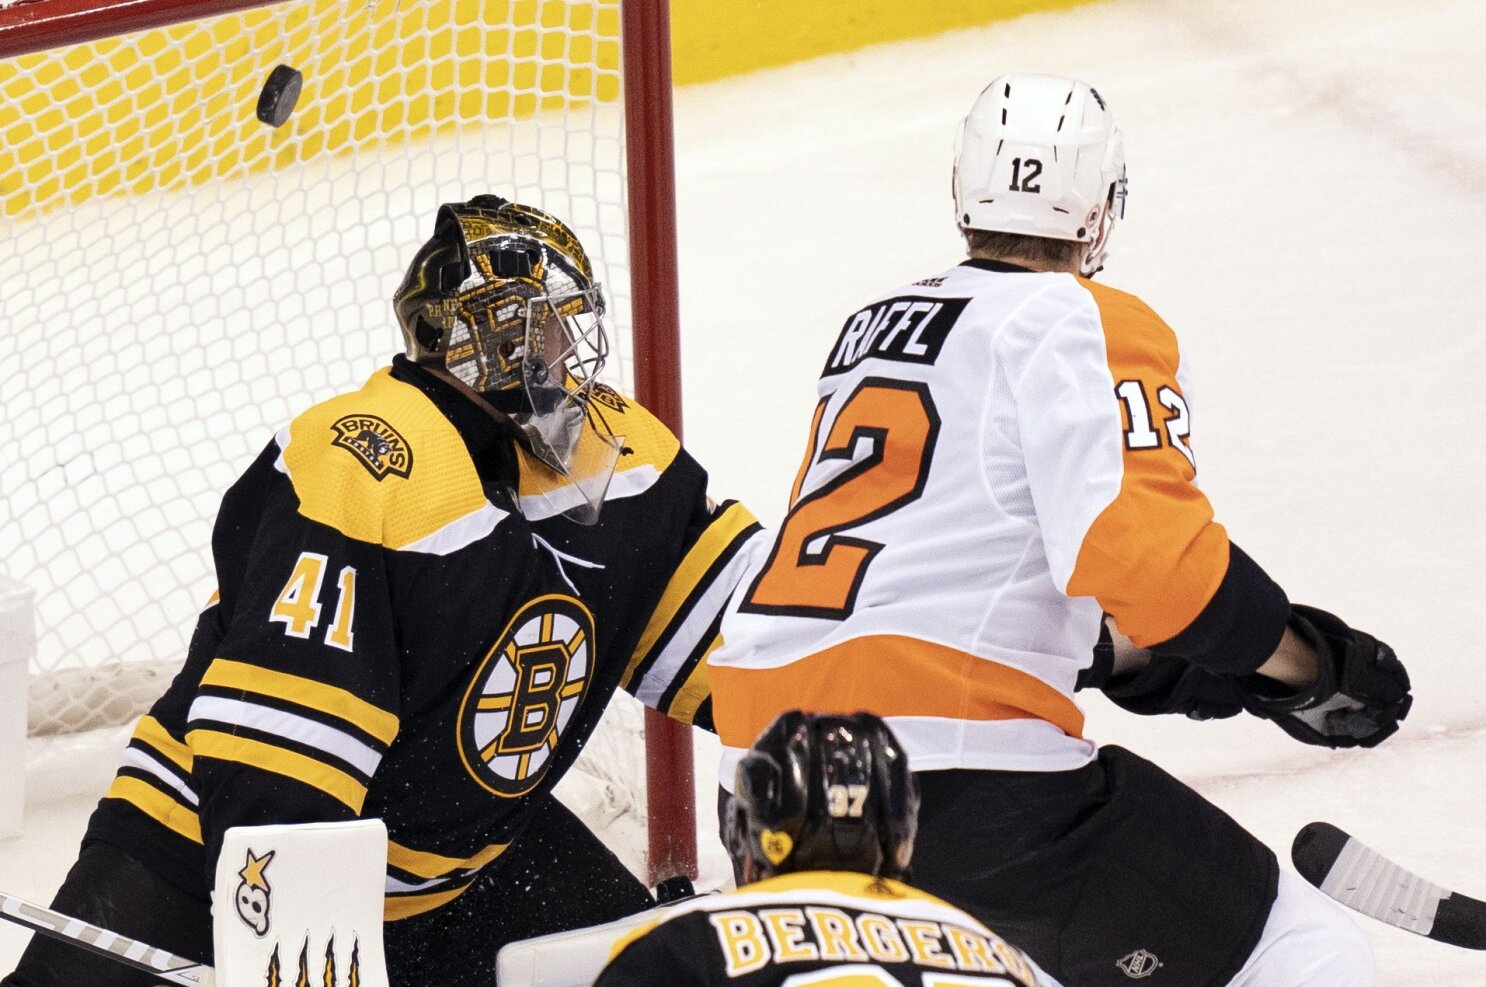 As Torey Krug readies for playoffs, he acknowledges time in Boston